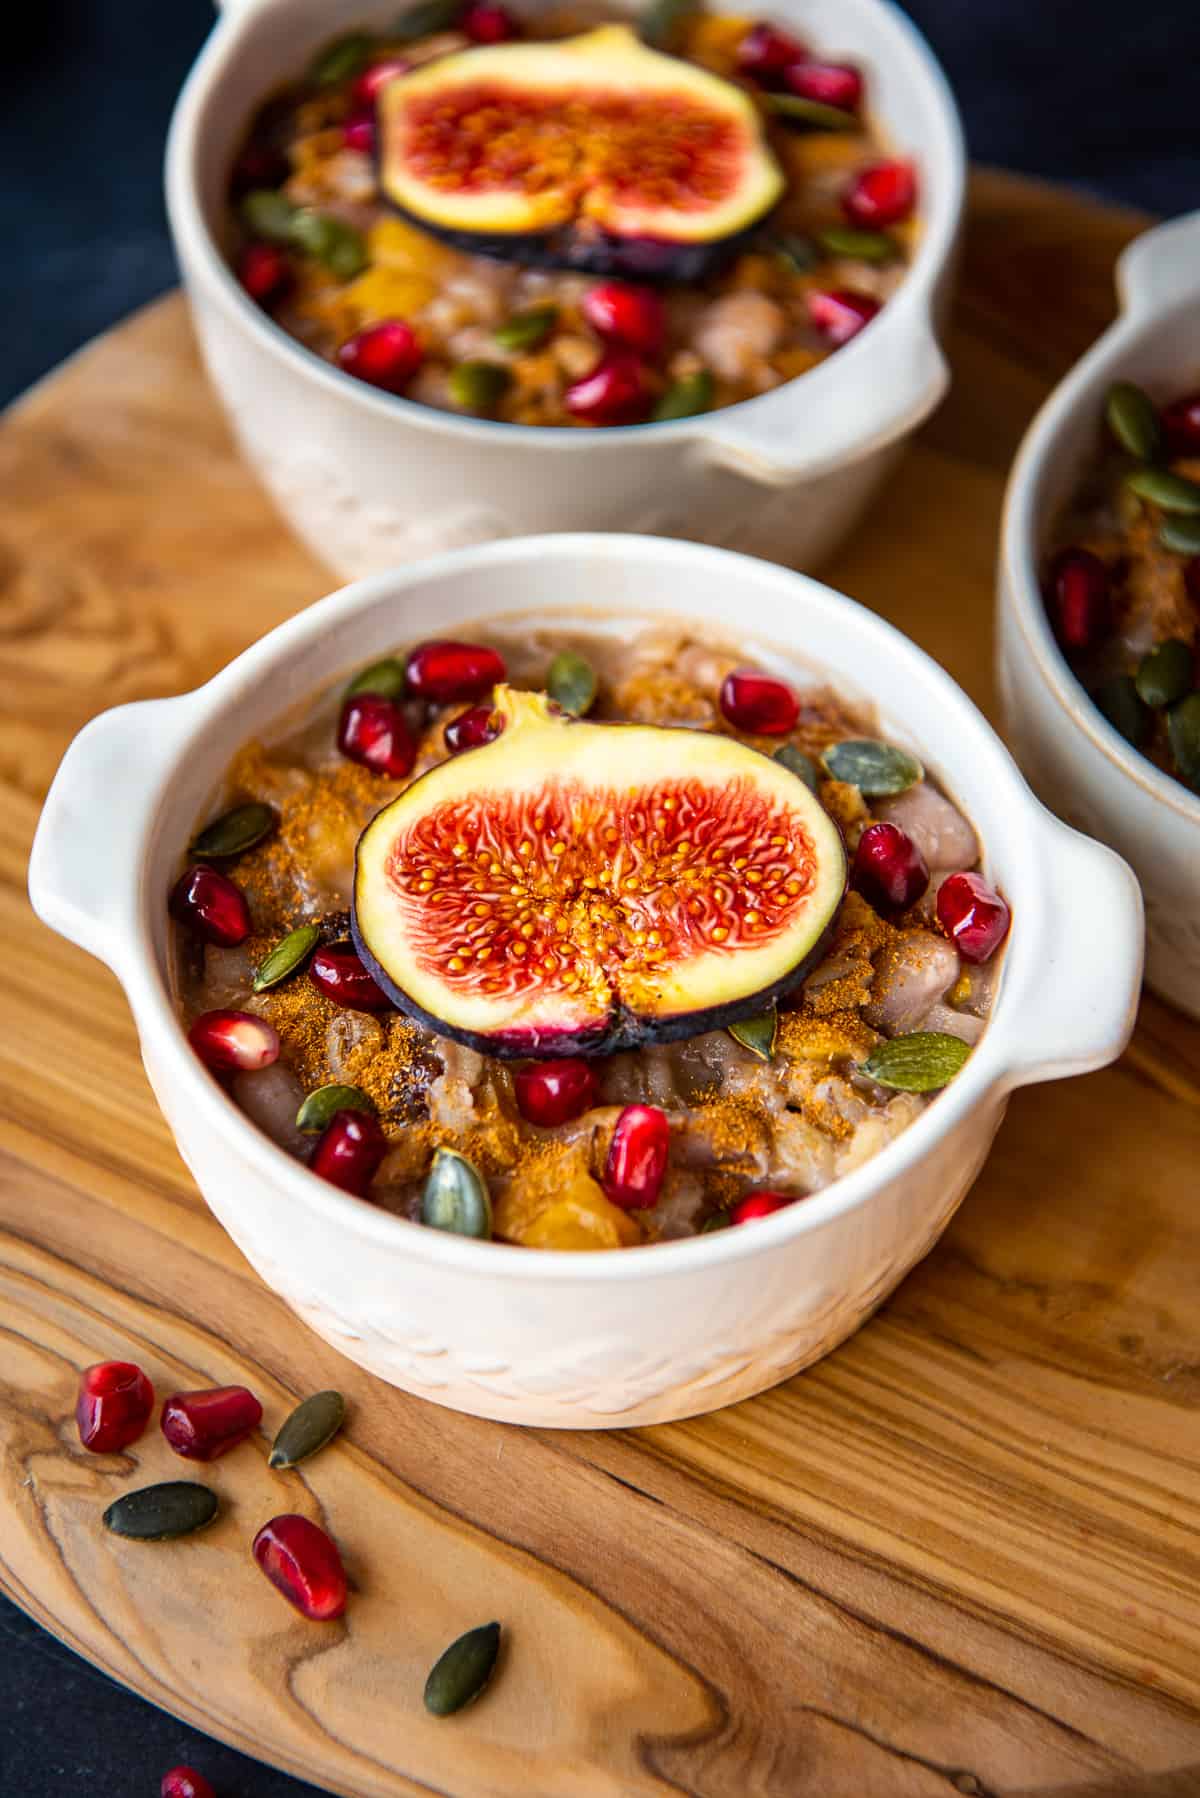 Ashure topped with figs and pomegranate arils in white bowls.